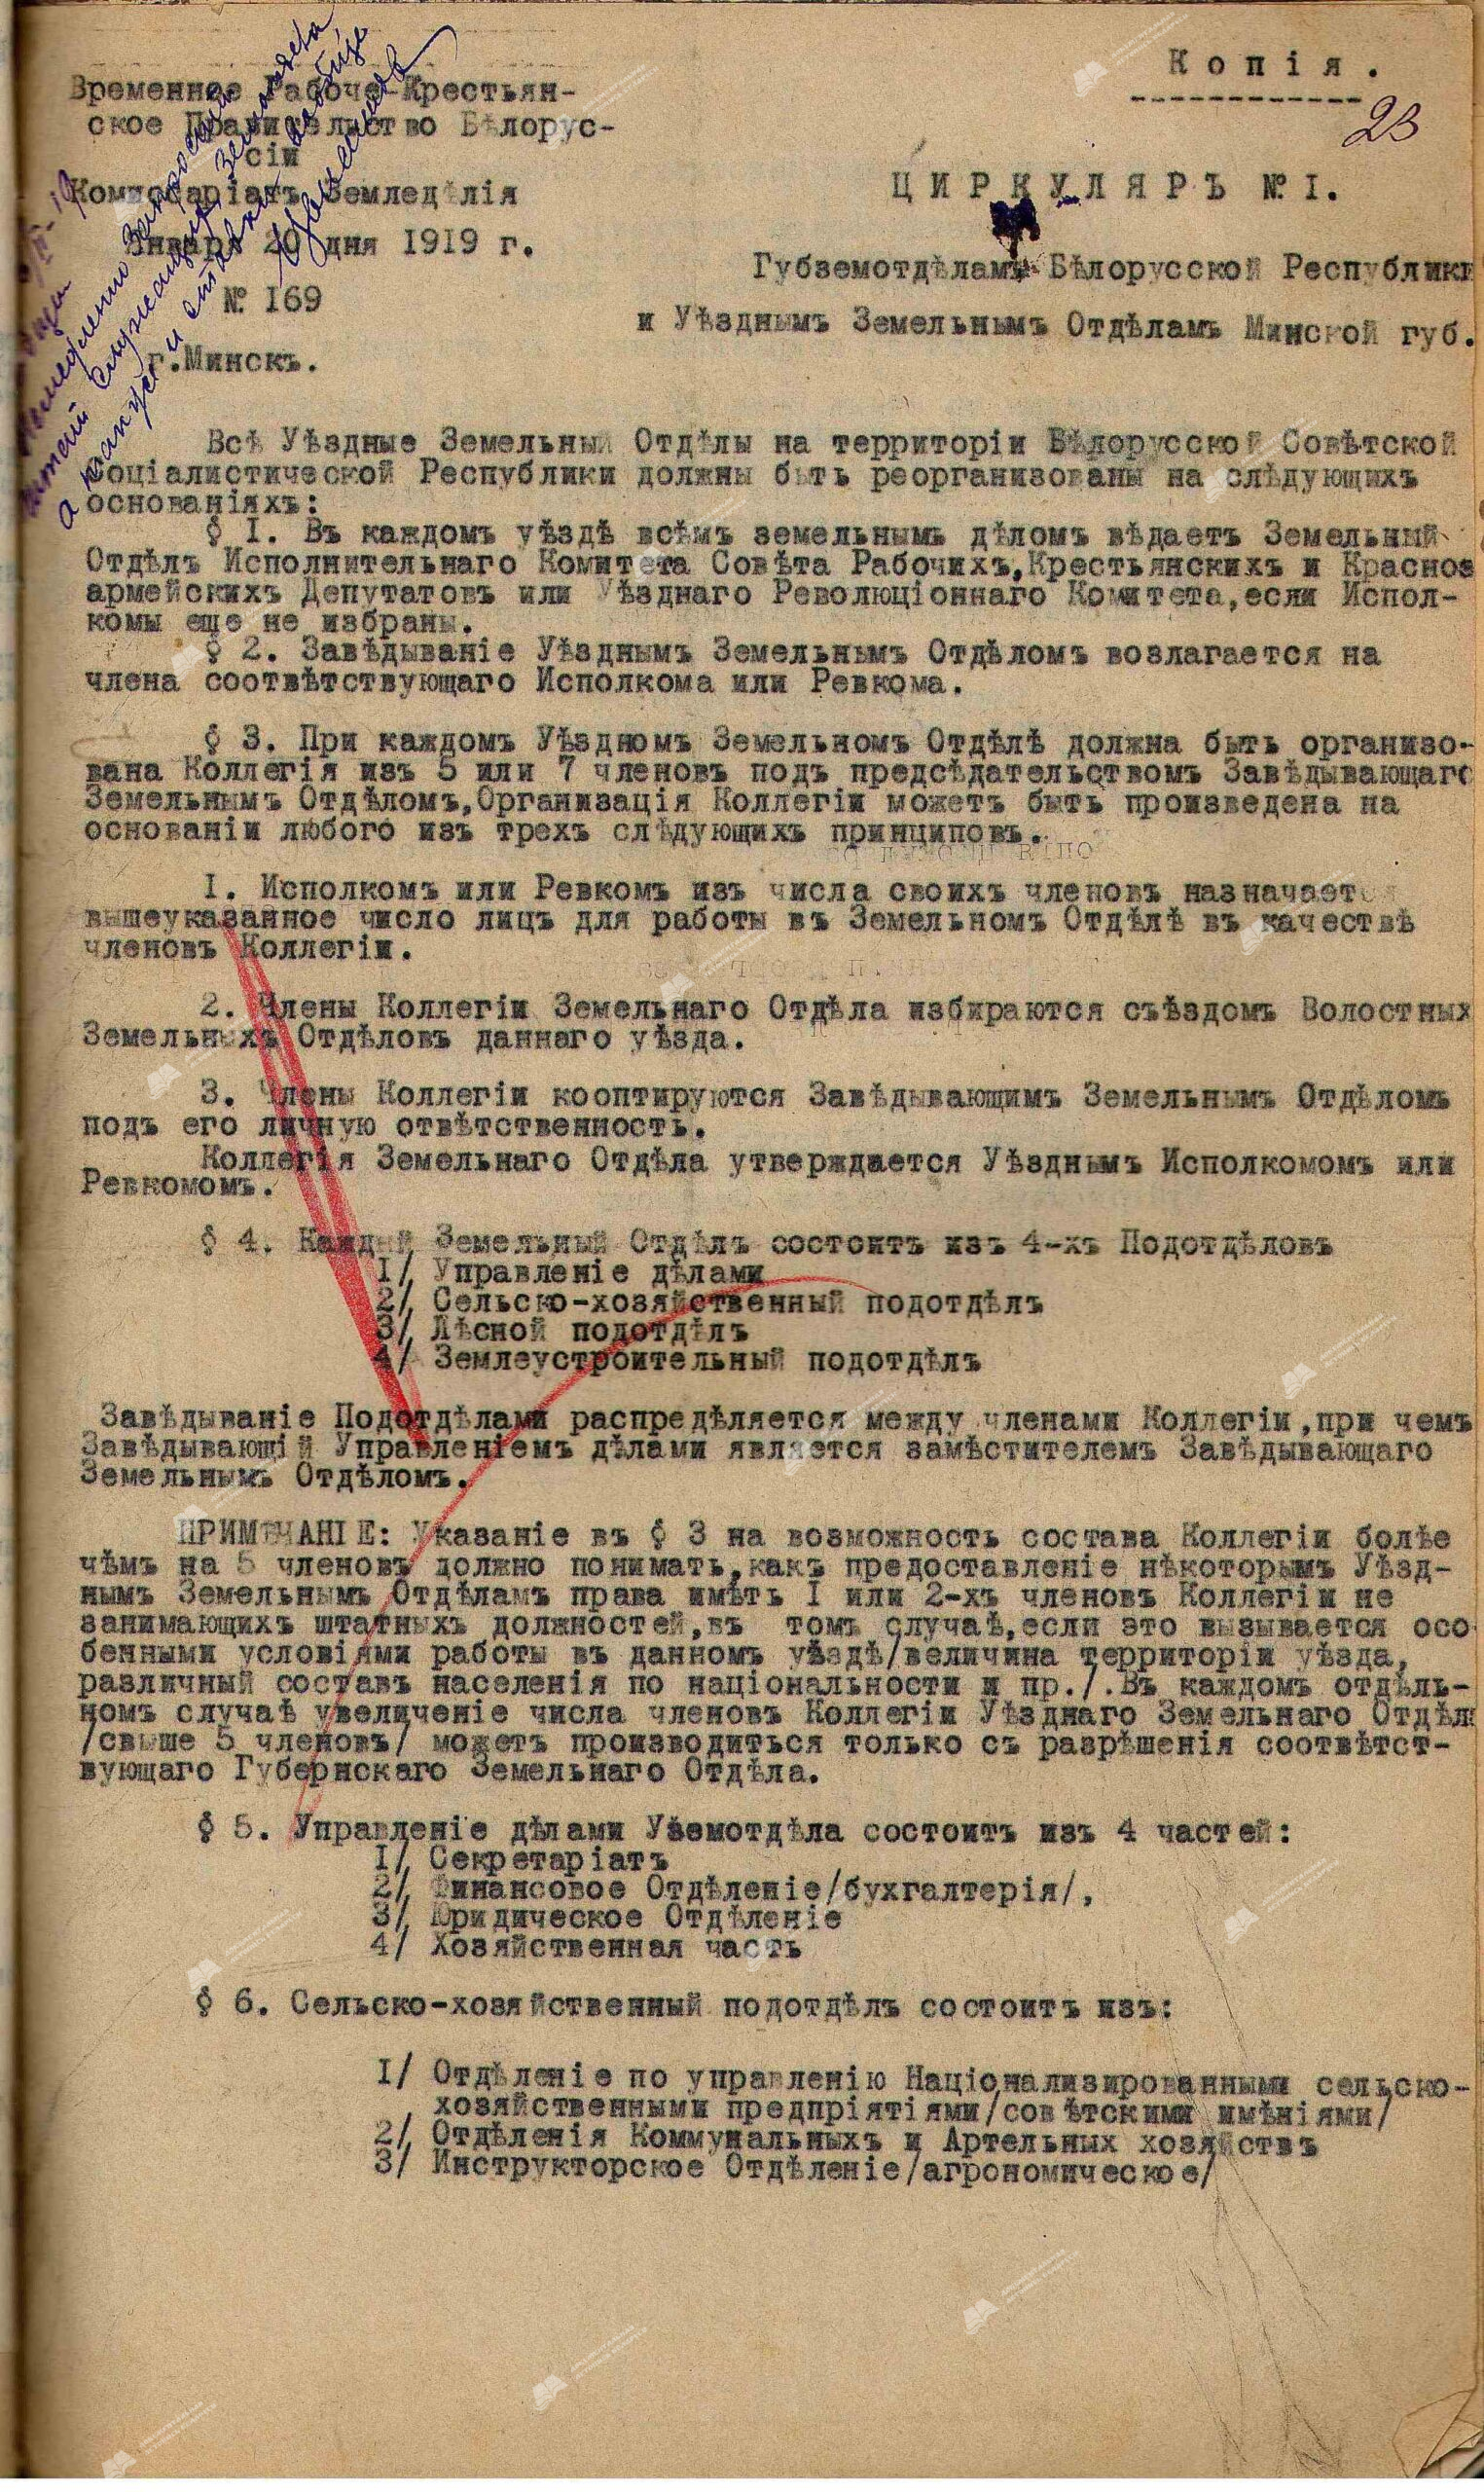 Circular No. 1 of the Commissariat of Agriculture of the Provisional Workers' and Peasants' Government of Belarus «On the organization of county land departments on the territory of the Belarusian Soviet Socialist Republic and the scheme of the county land department»-стр. 0